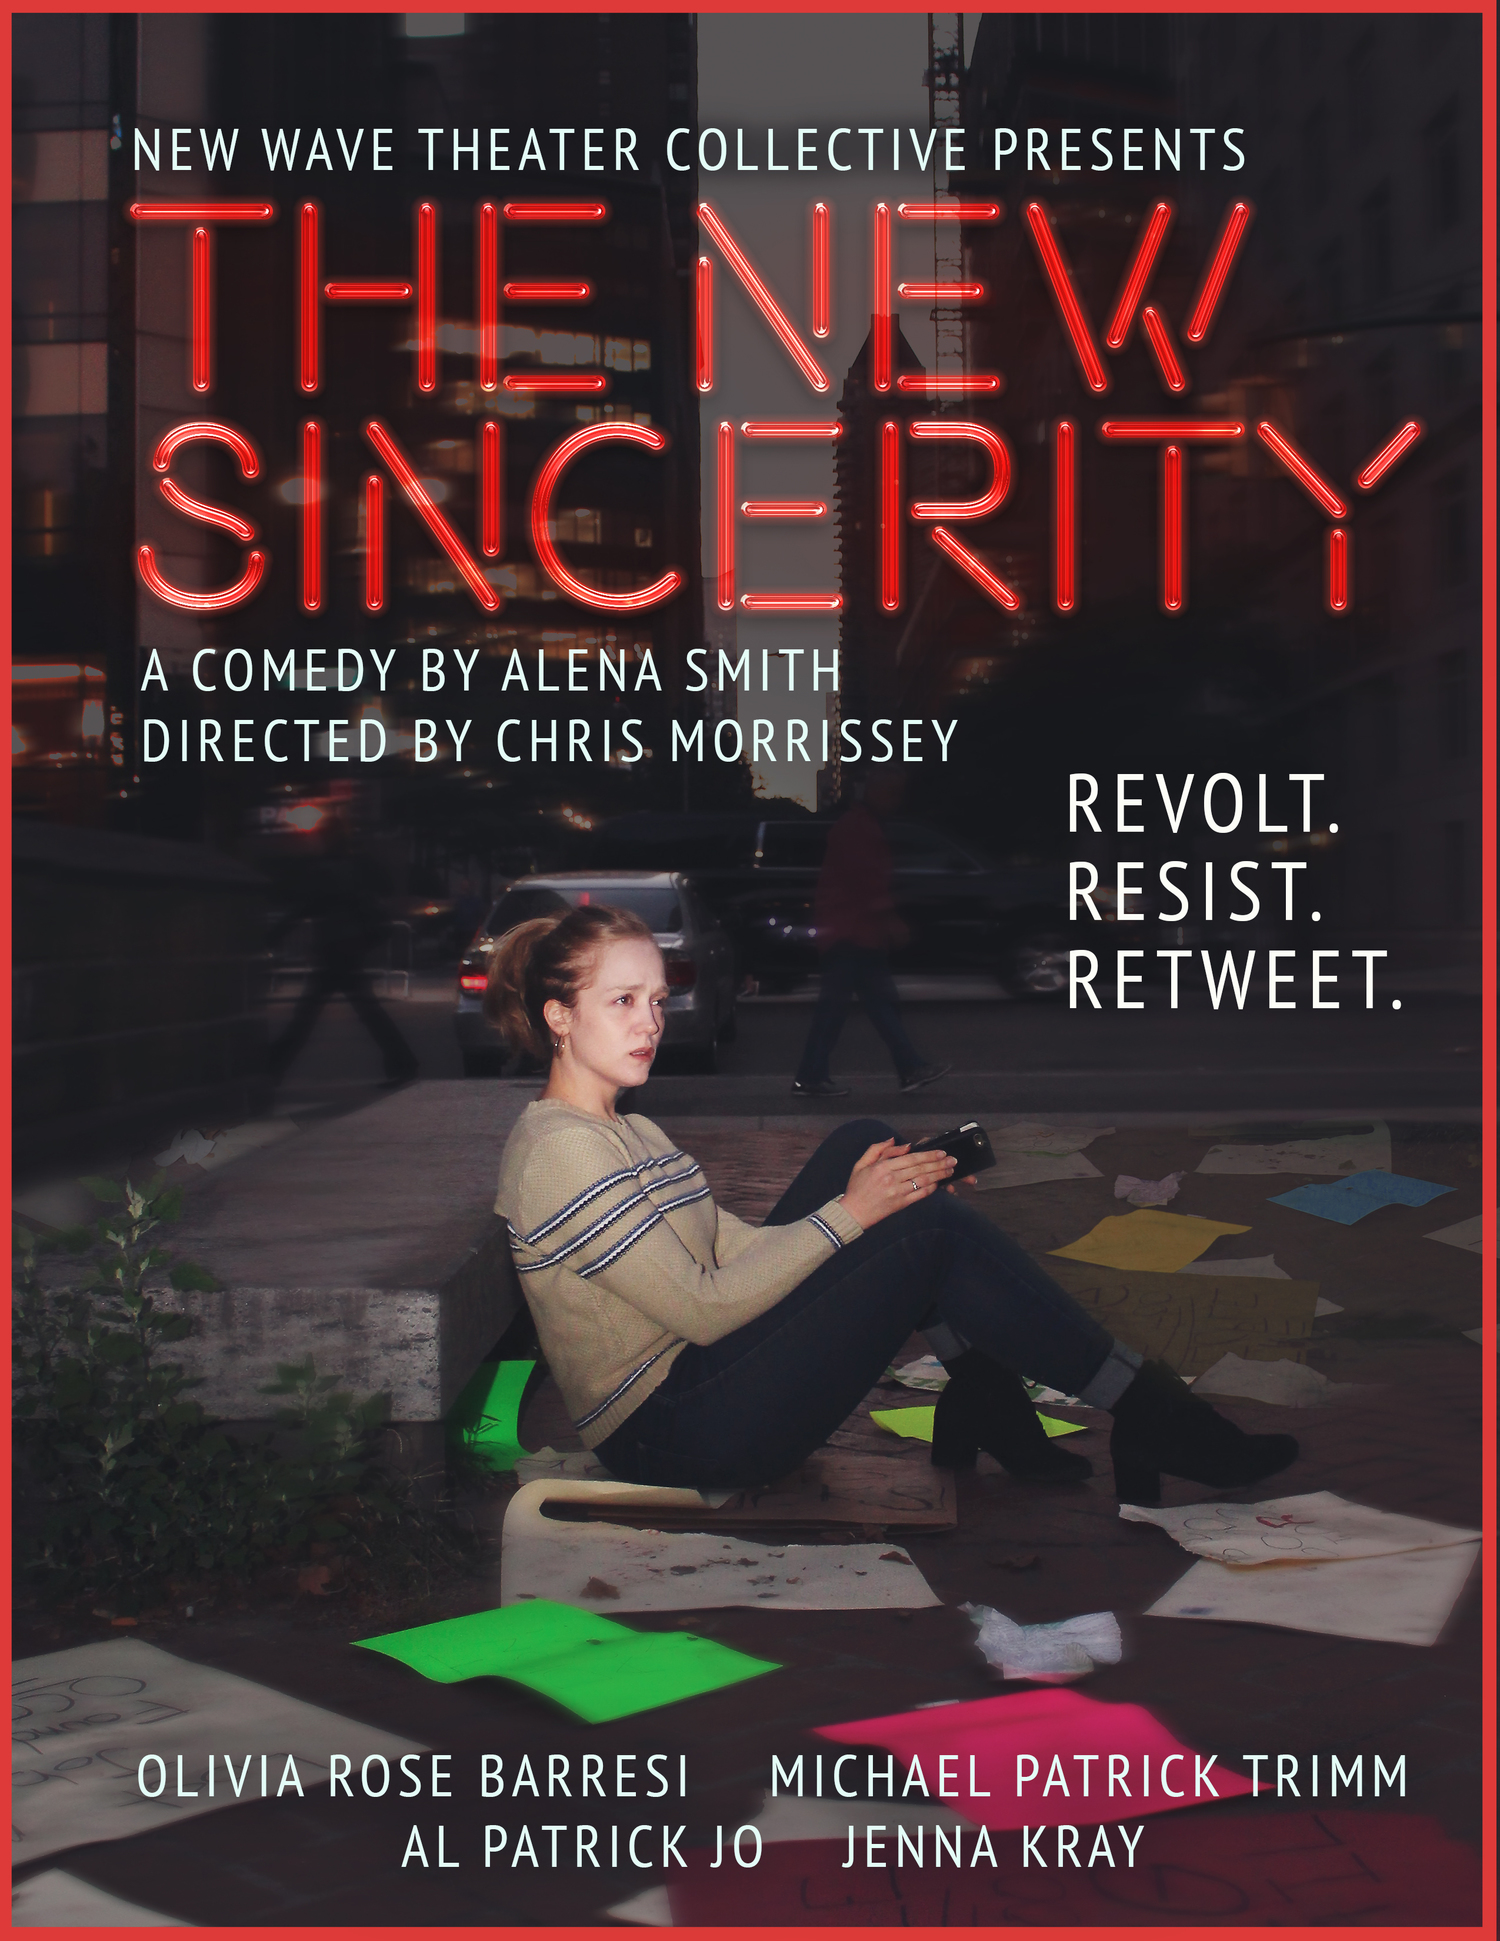 New Wave Theater Collective to Present Alena Smith's THE NEW SINCERITY 